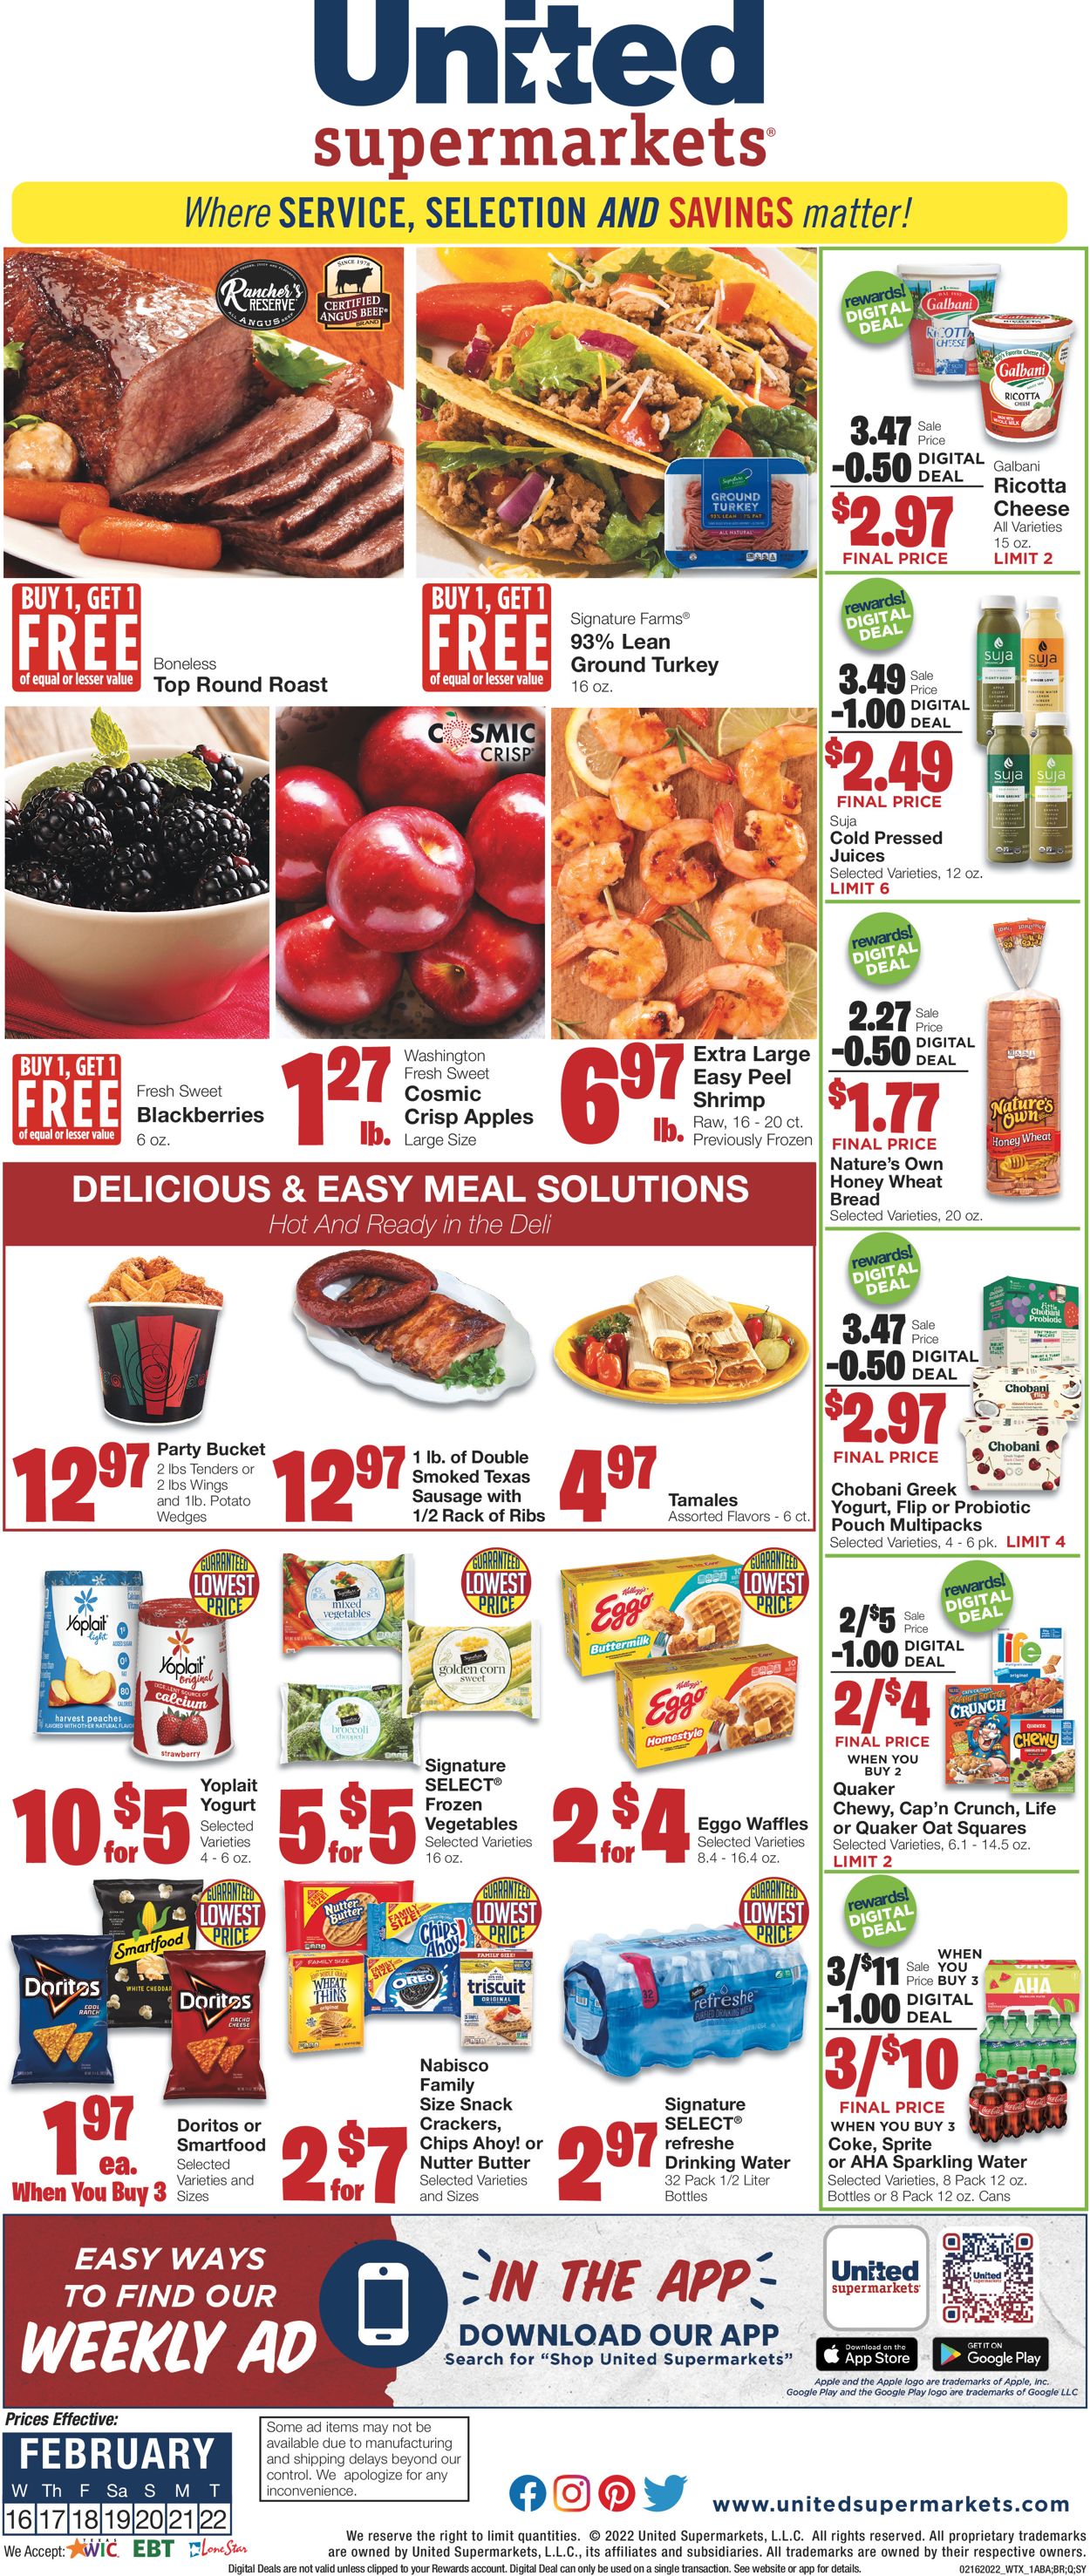 United Supermarkets Current weekly ad 02/16 - 02/22/2022 - frequent-ads.com